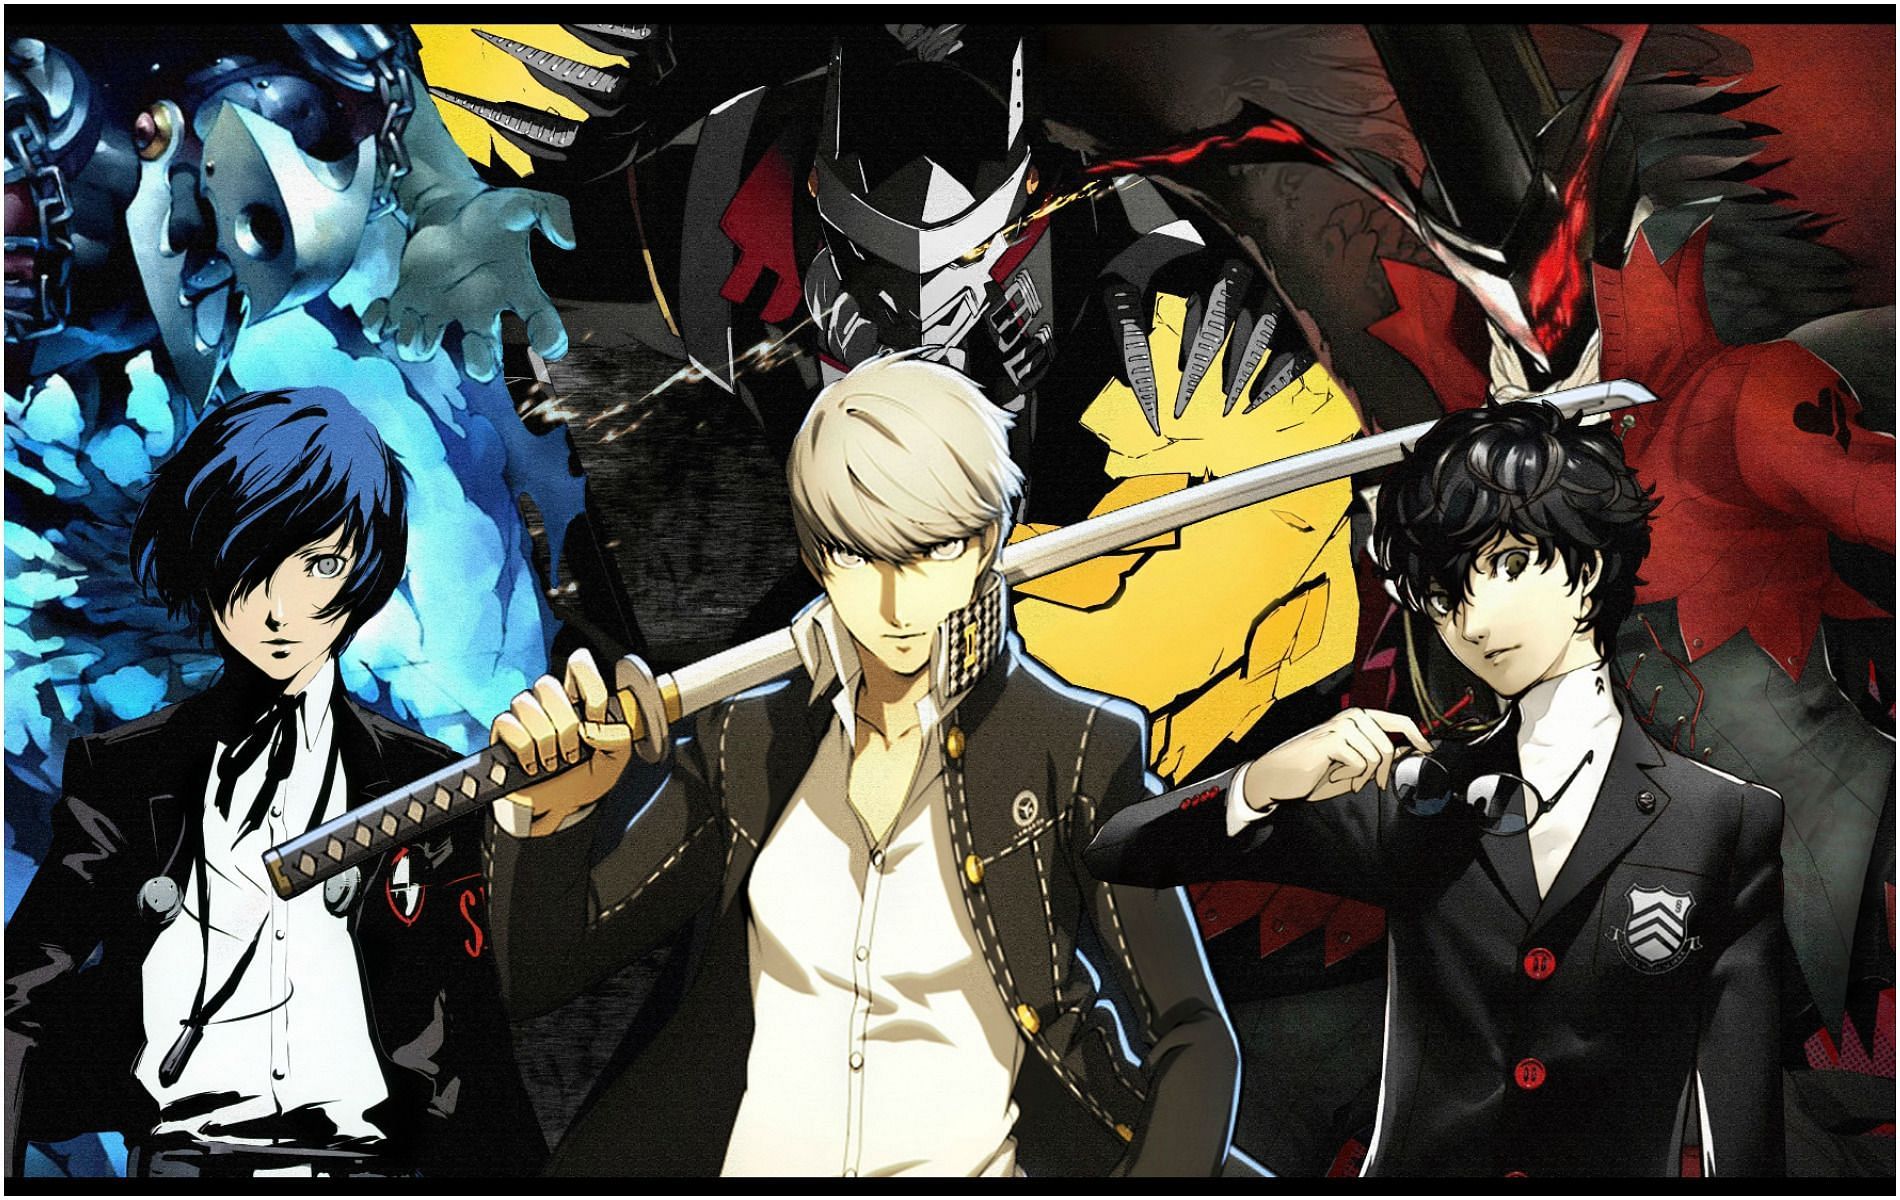 Persona 5 Royal's eagerly anticipated console ports put to the test